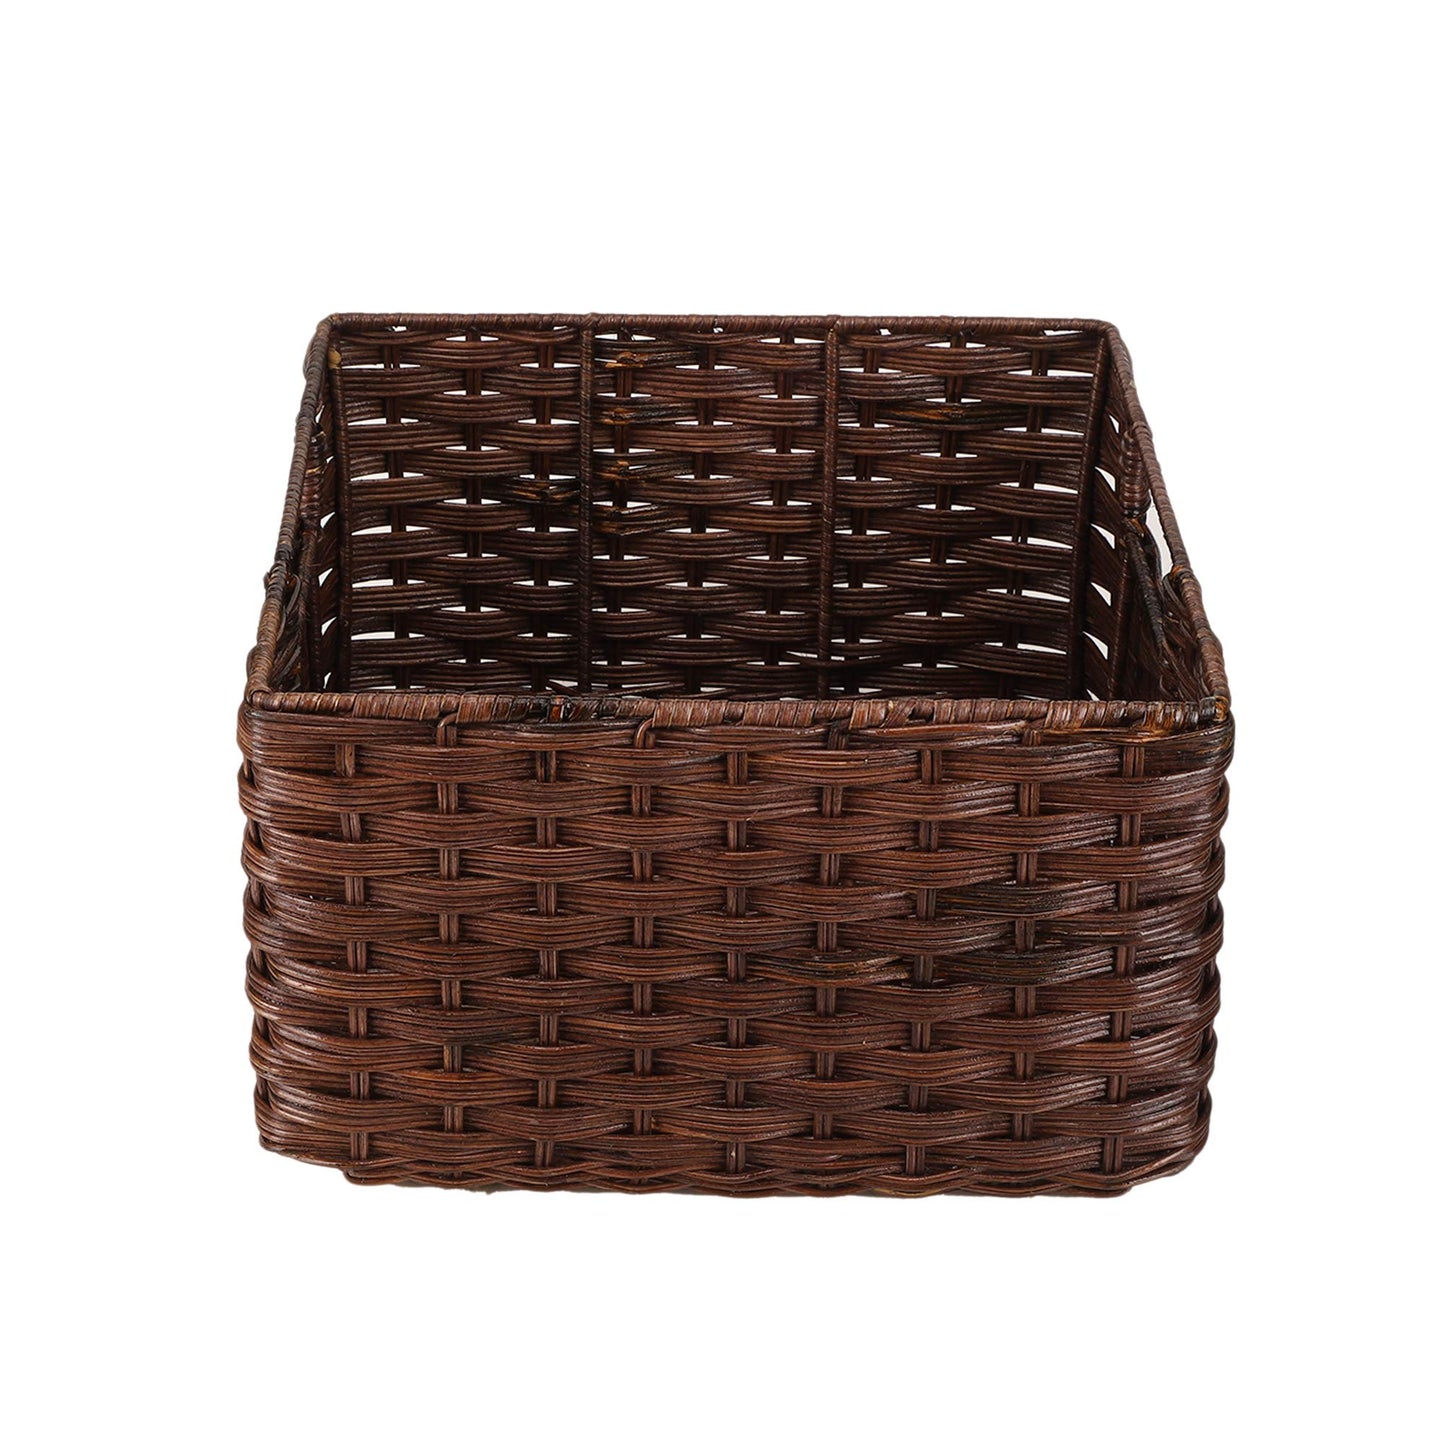 AKWAY Handcrafted Wicker Storage Container Basket with Handles for Toiletry Cosmetic, Towels, Toys, Bathroom, Bedroom, Wardrobe (Antique Black) - Akway